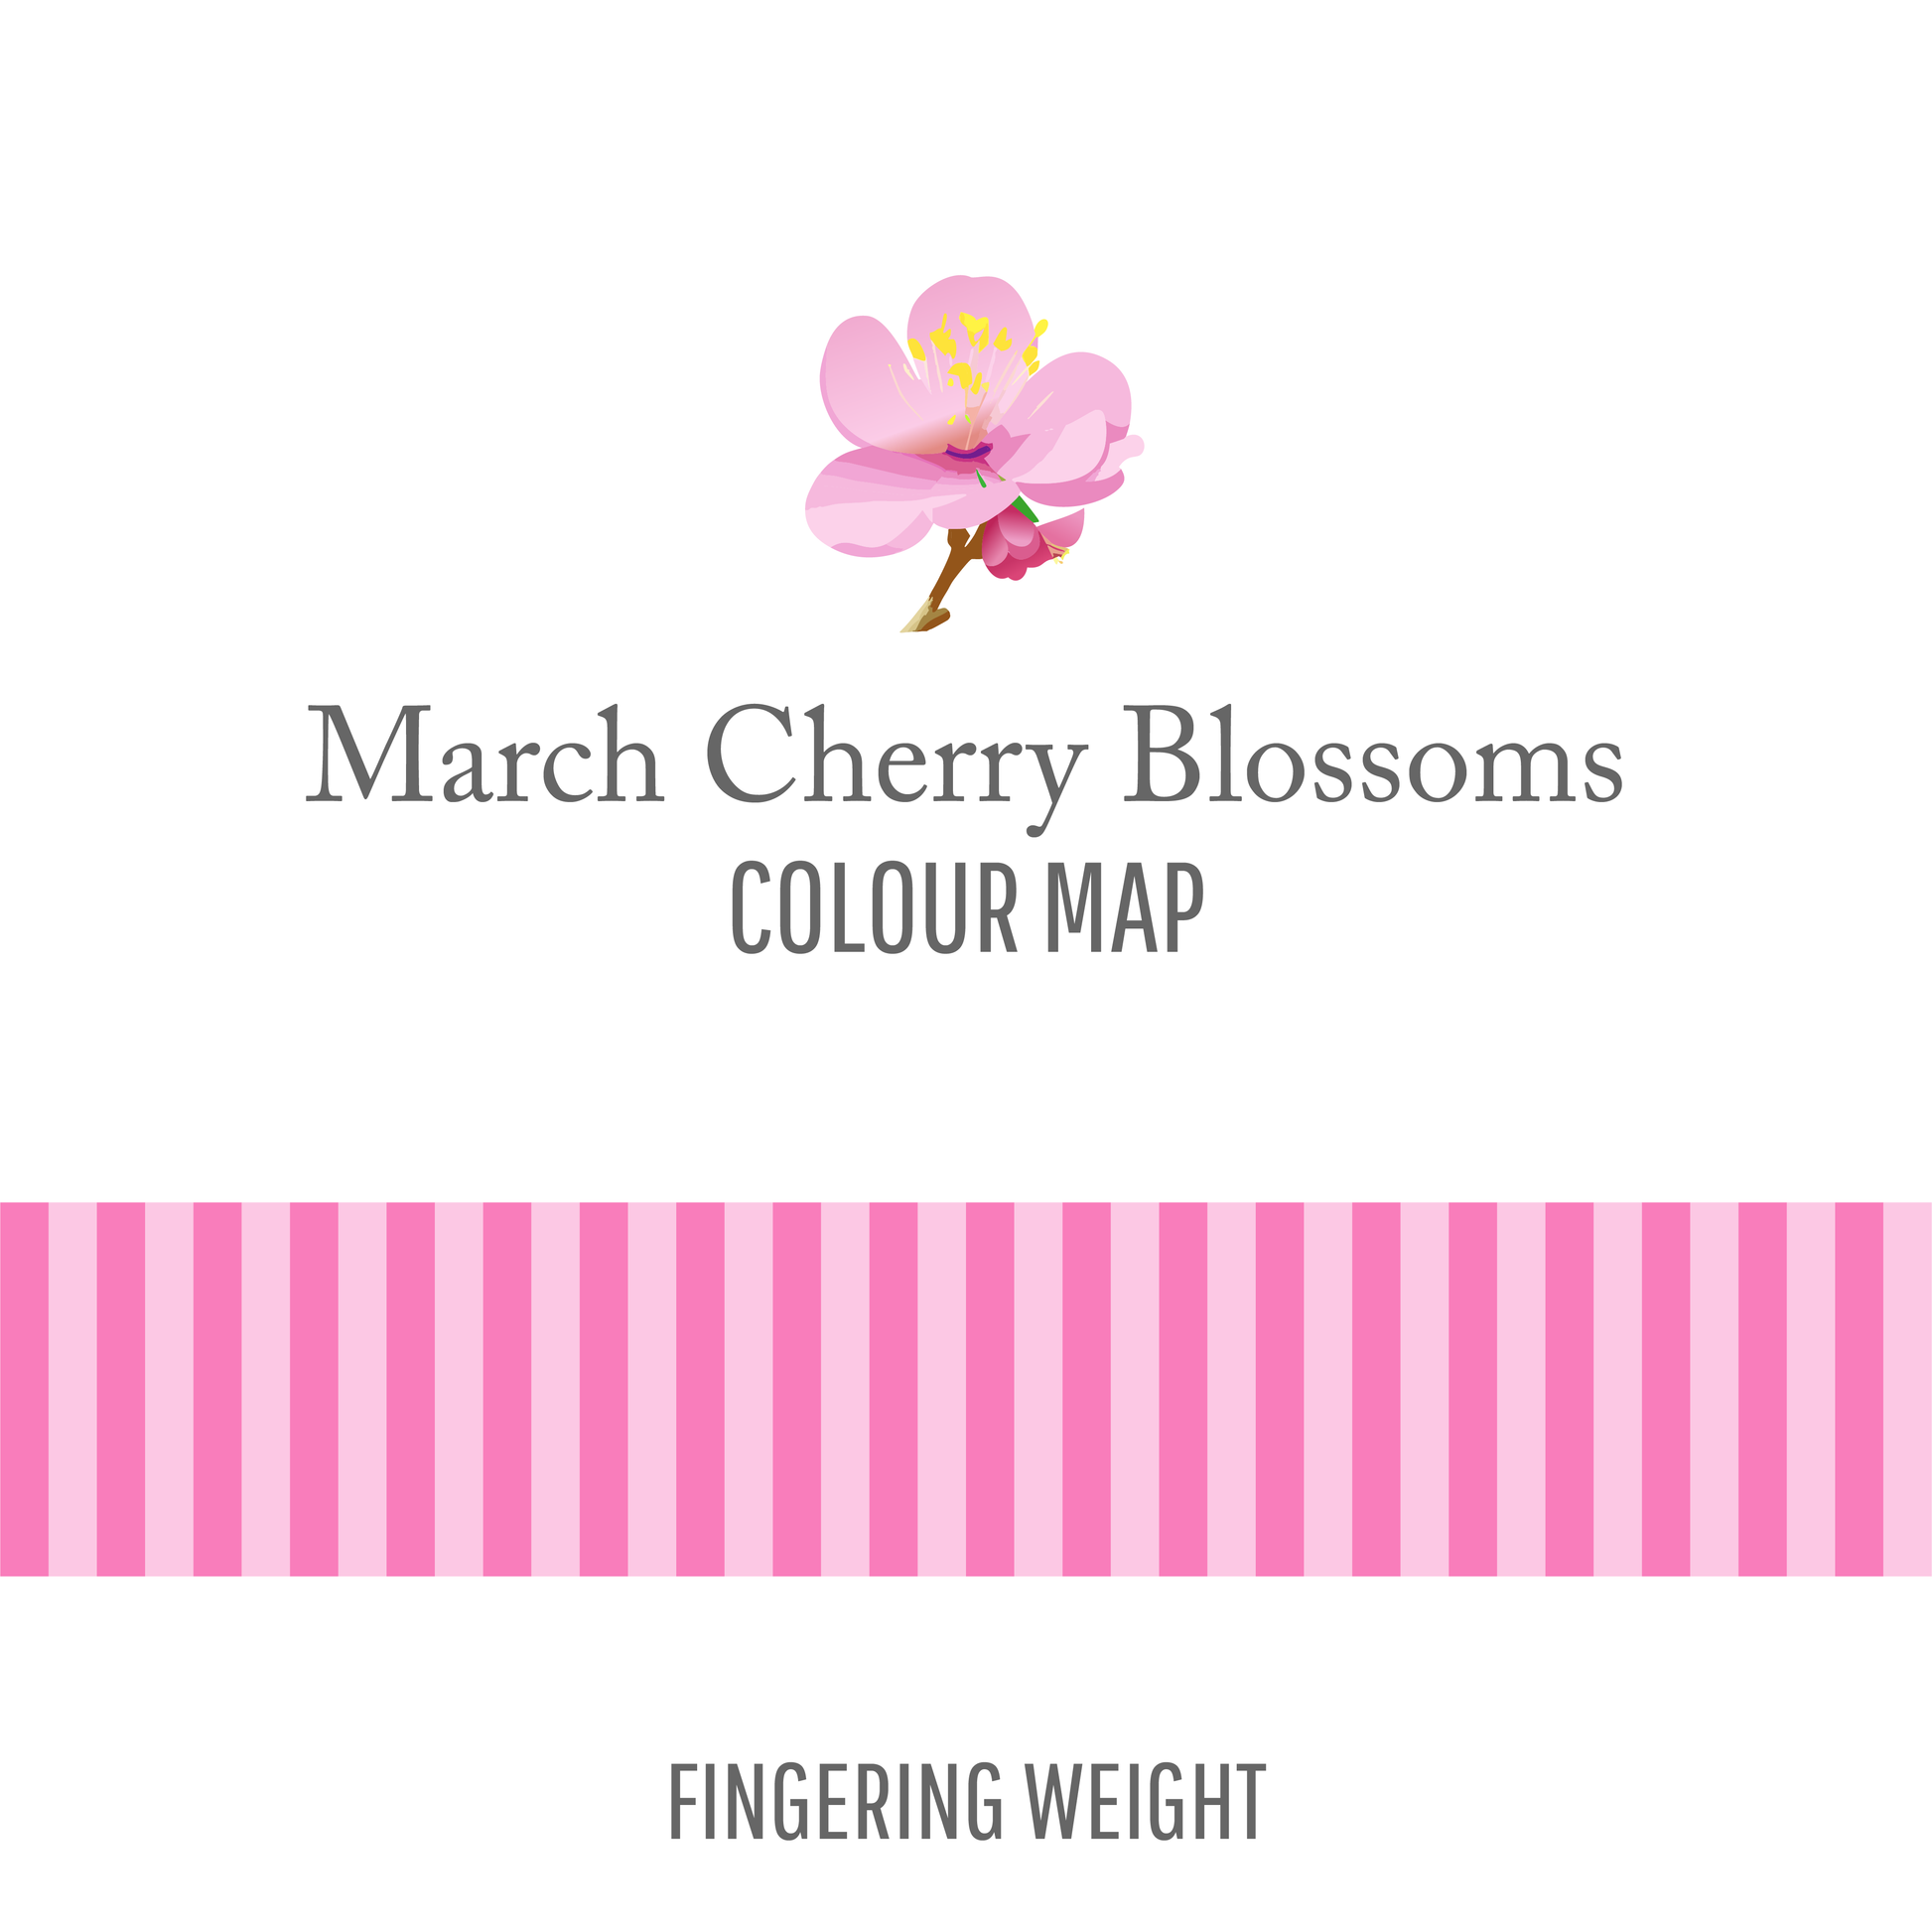 March CHerry Blossoms colour map fingering weight